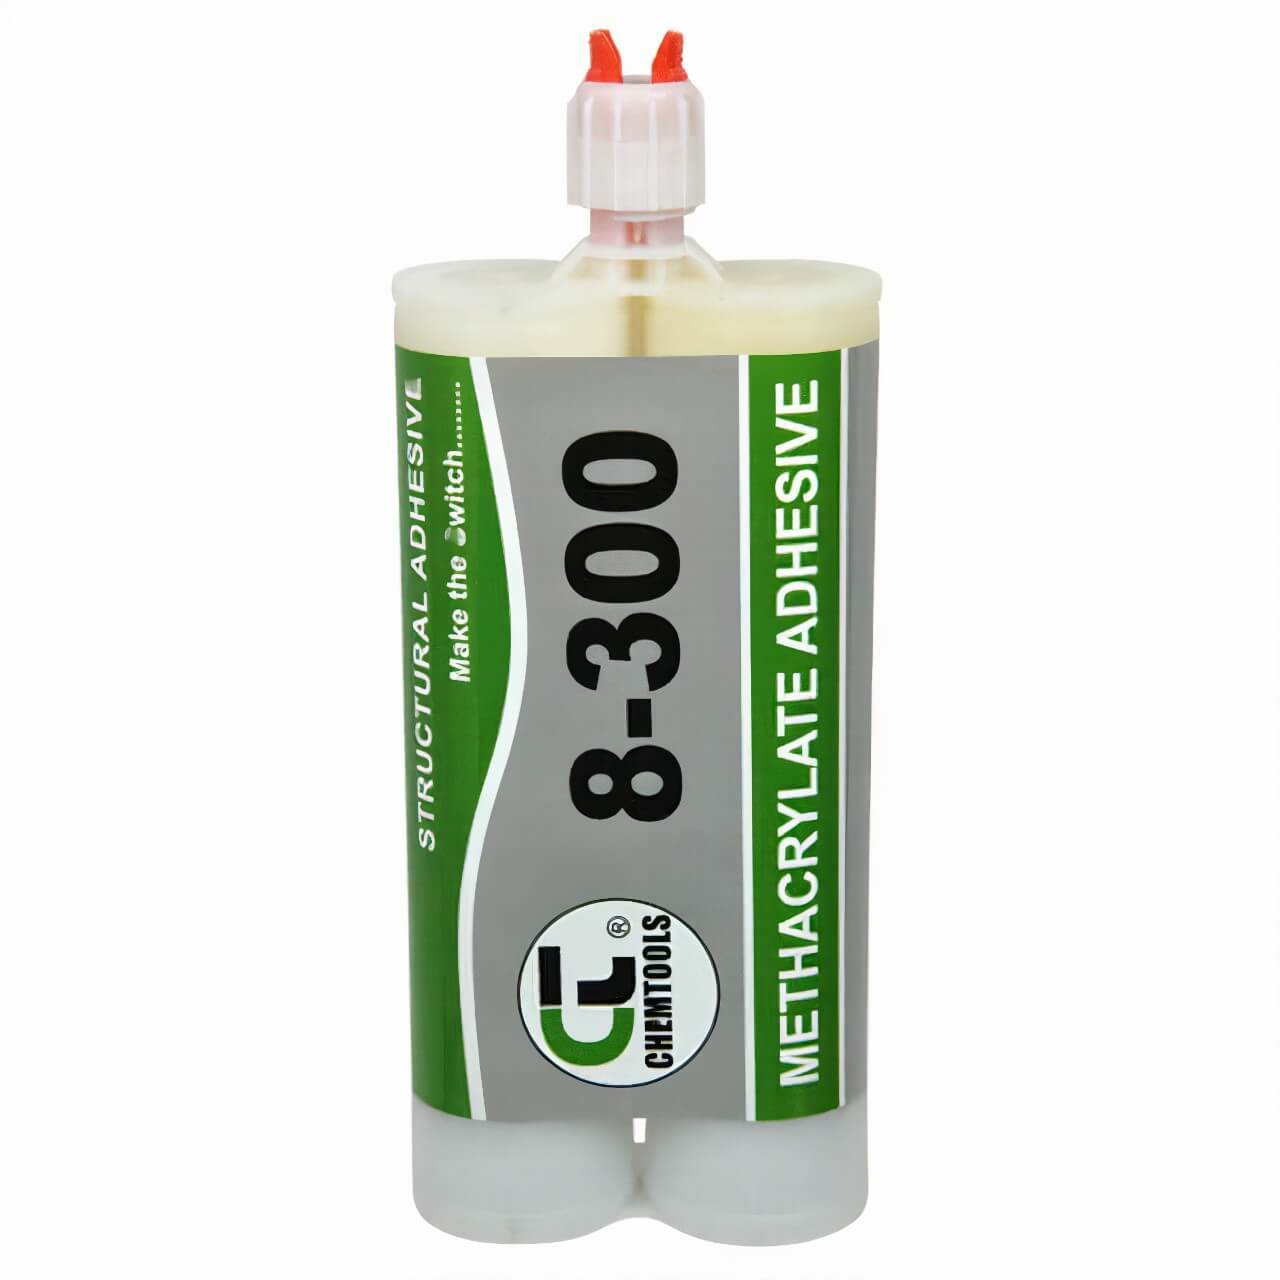 CT Structual Adhesive 2 Part 400ml